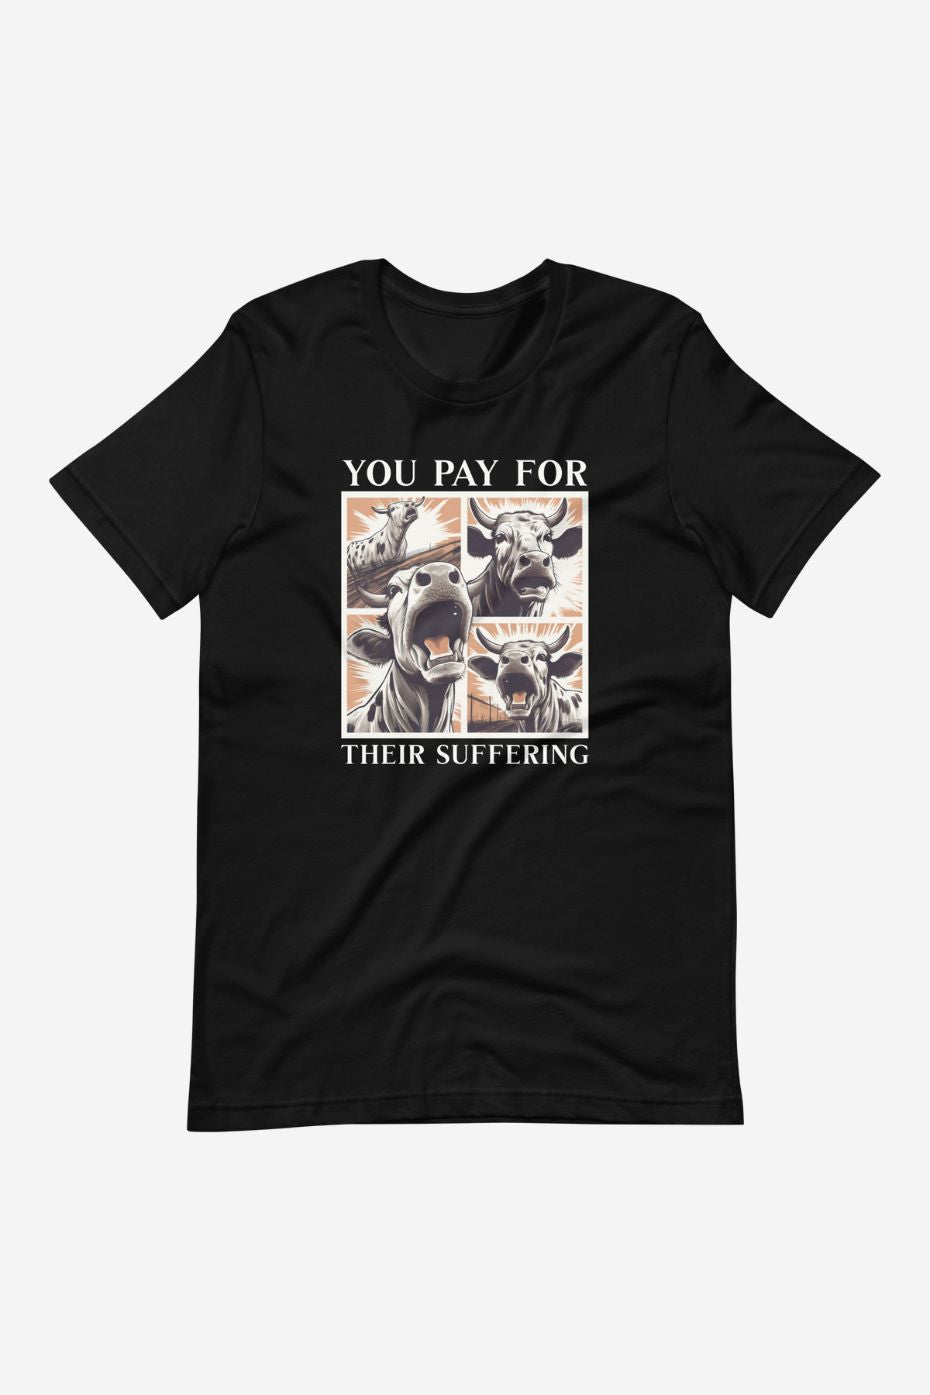 You Pay For Their Suffering - Unisex t-shirt